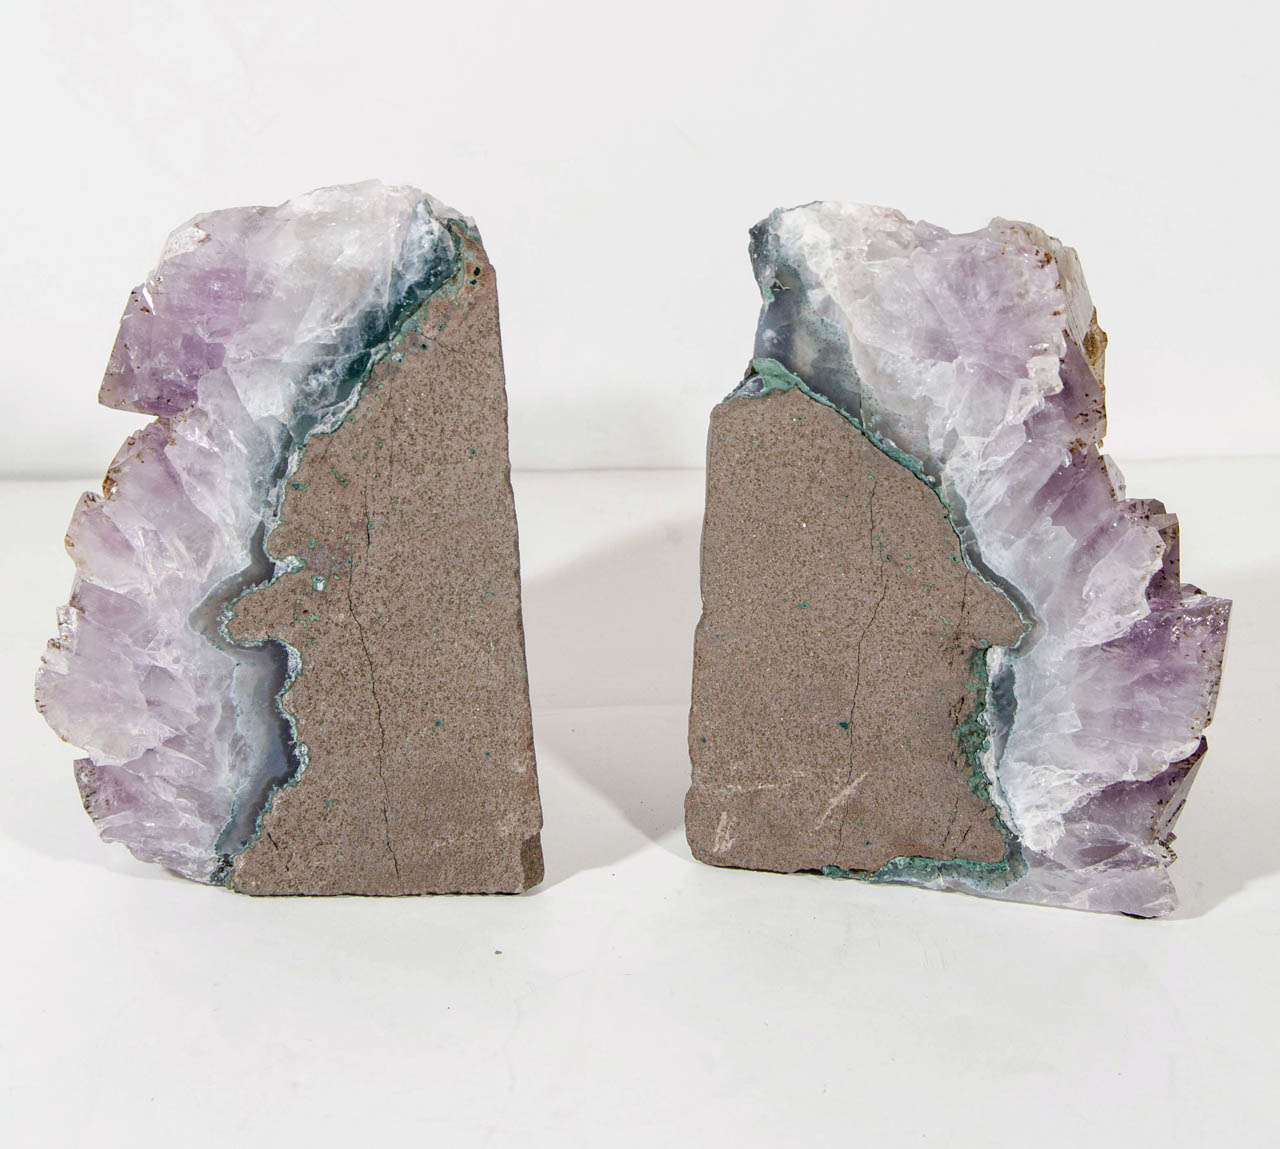 Brazilian Pair of Large and Exquisite Amethyst Crystal Bookends with Rare Citrine Center Details